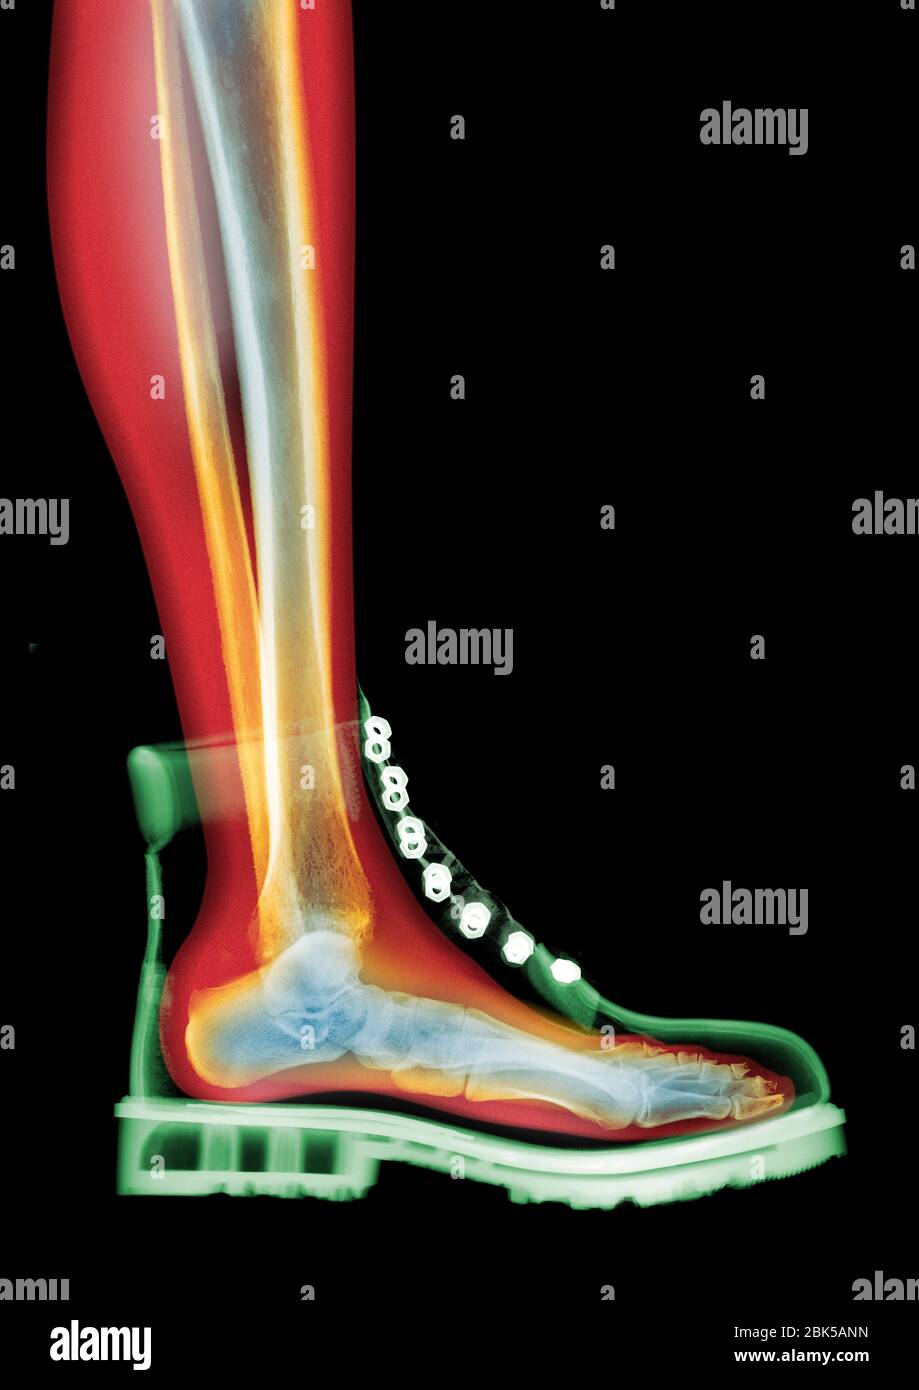 Lace-up boot, coloured MRI style X-ray. Stock Photo